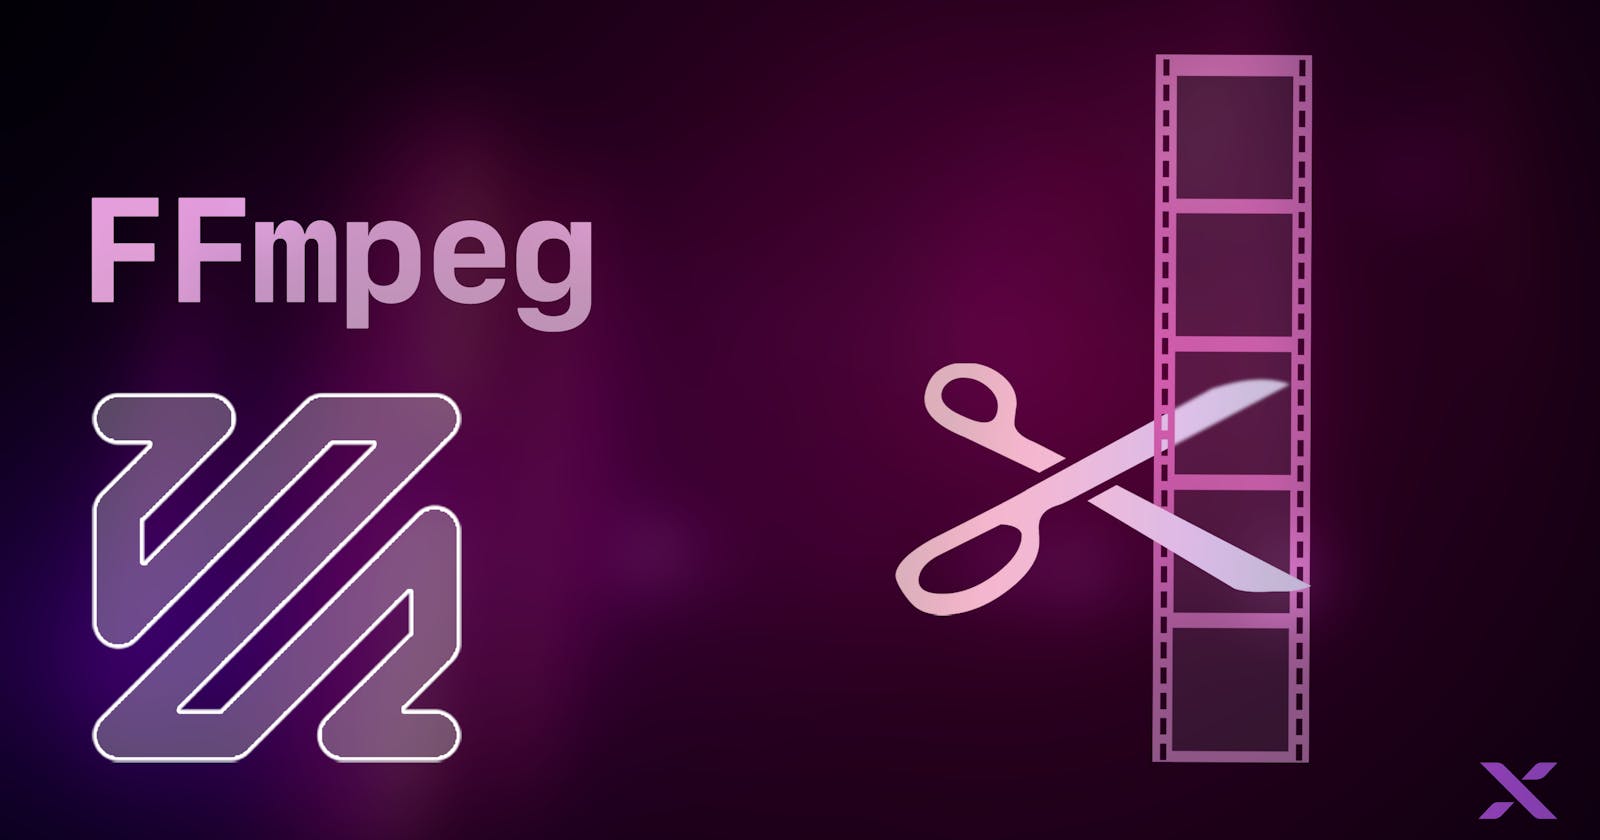 FFmpeg for common media tasks - converting, cutting, splicing, splitting, merging and more